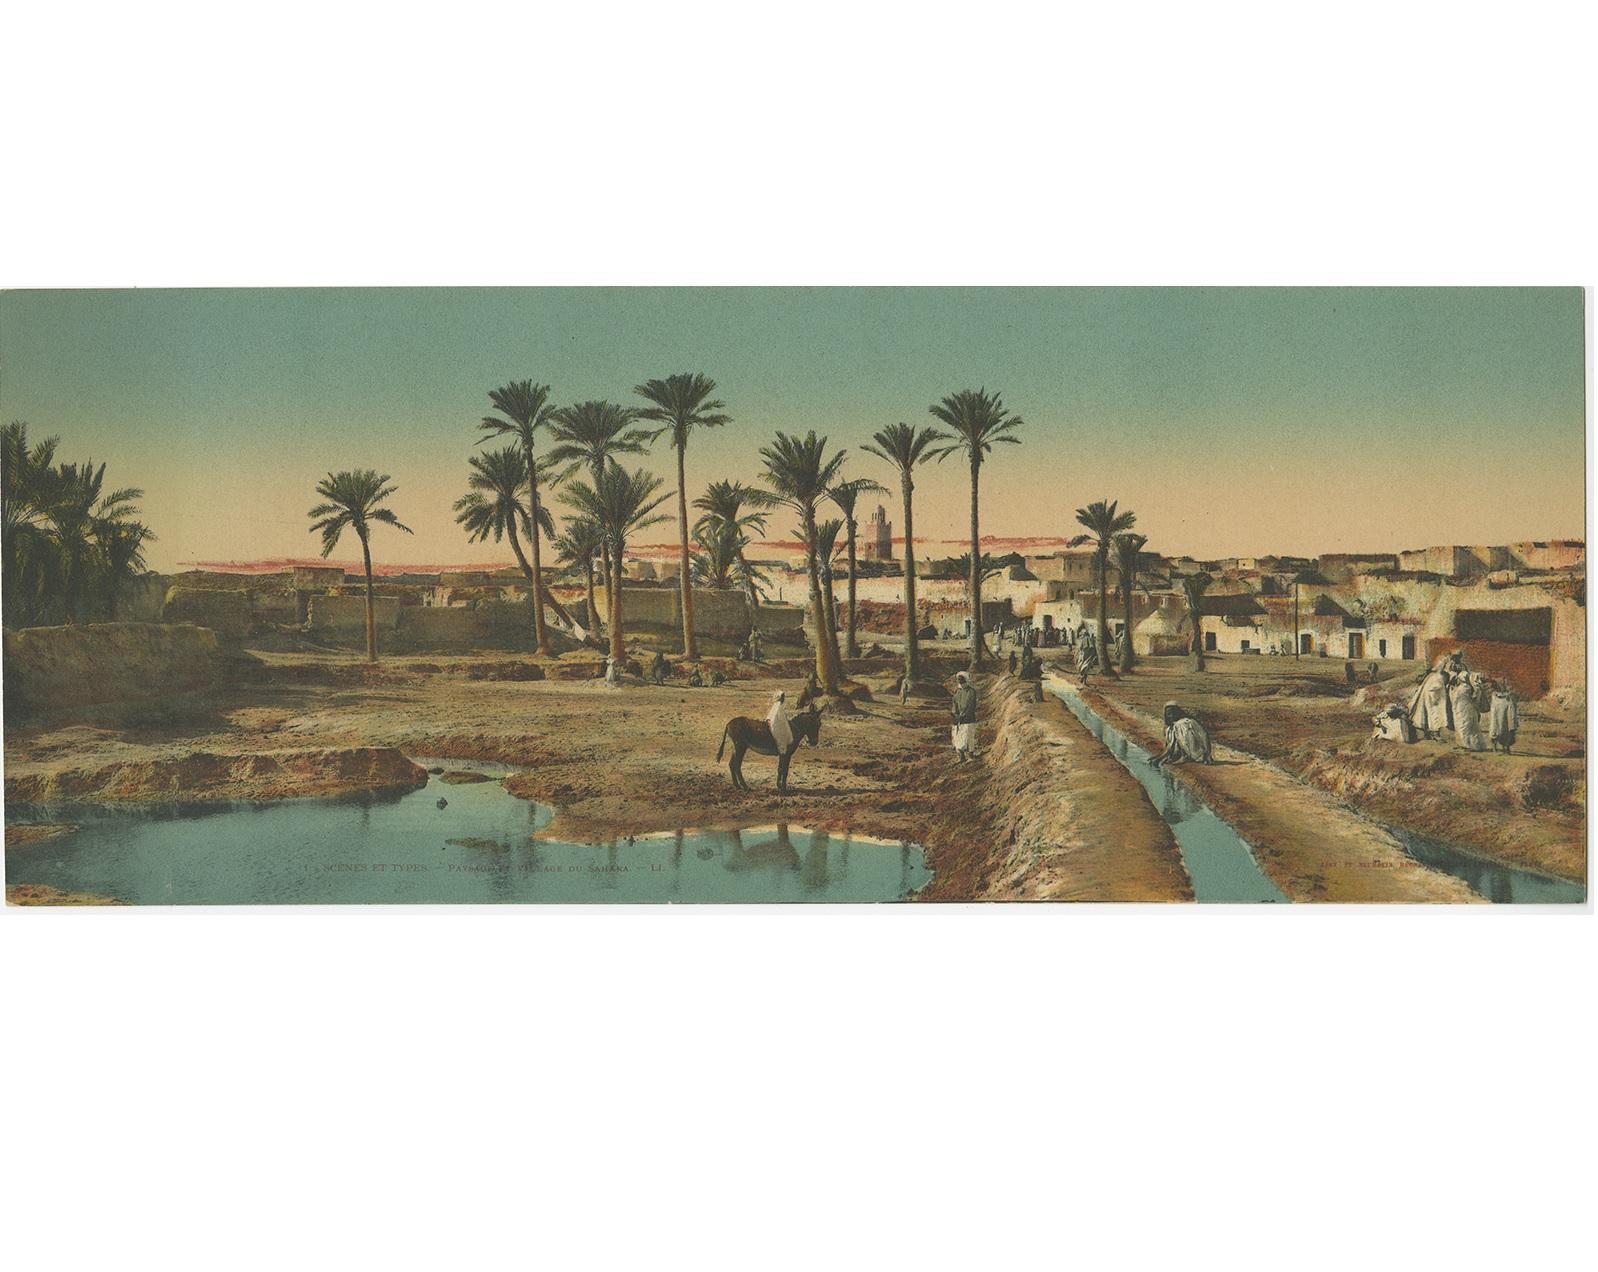 Set of two large panoramic postcards of the Sahara. It shows the sand dunes of the Sahara and a village. Both published by Lévy, Paris.